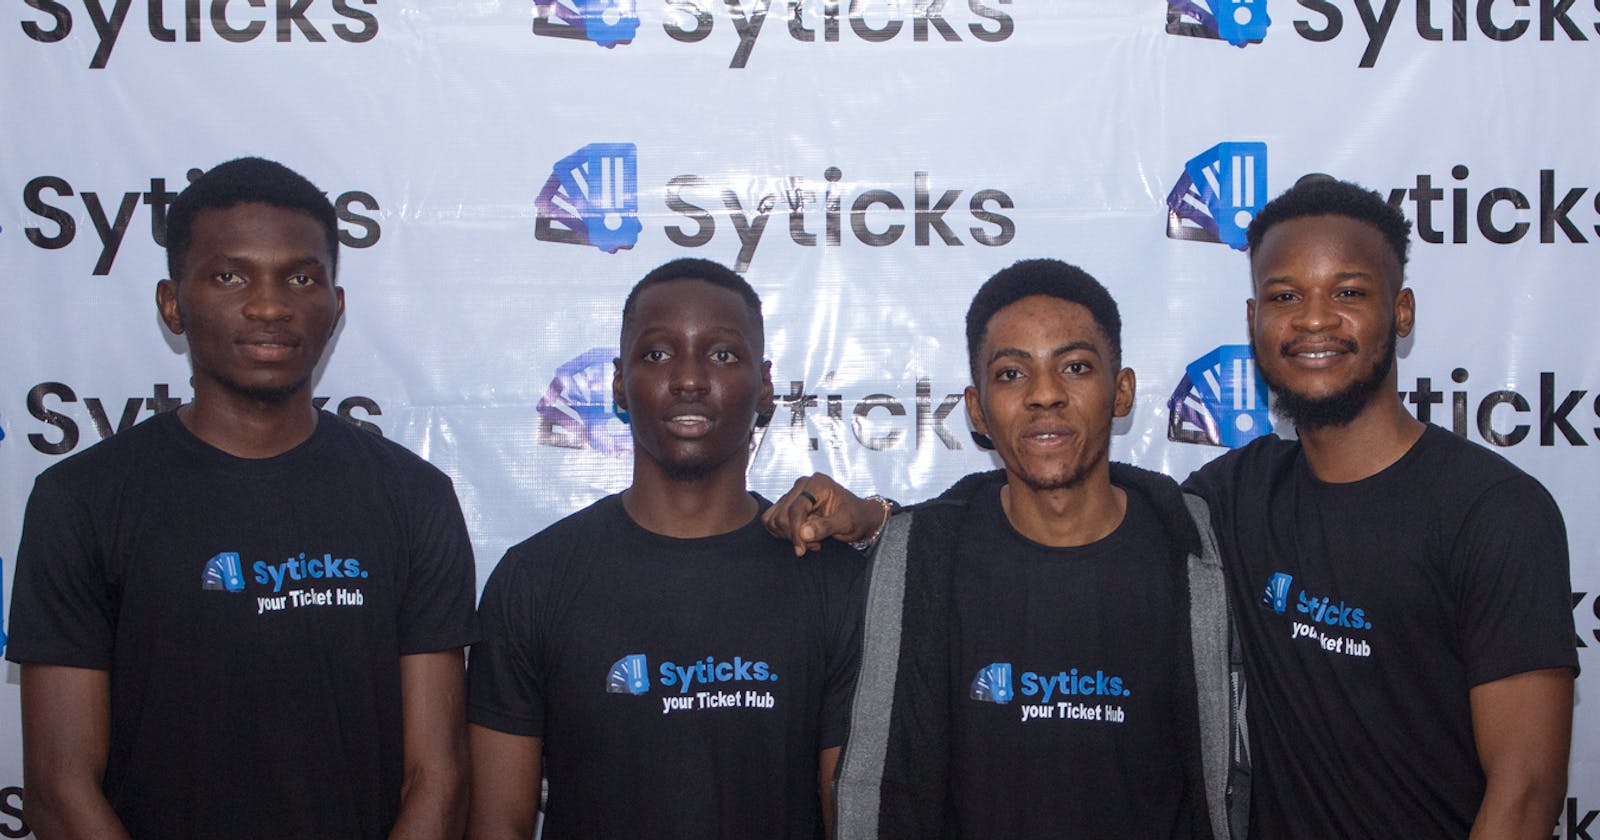 Syticks: The future of social ticketing in Africa